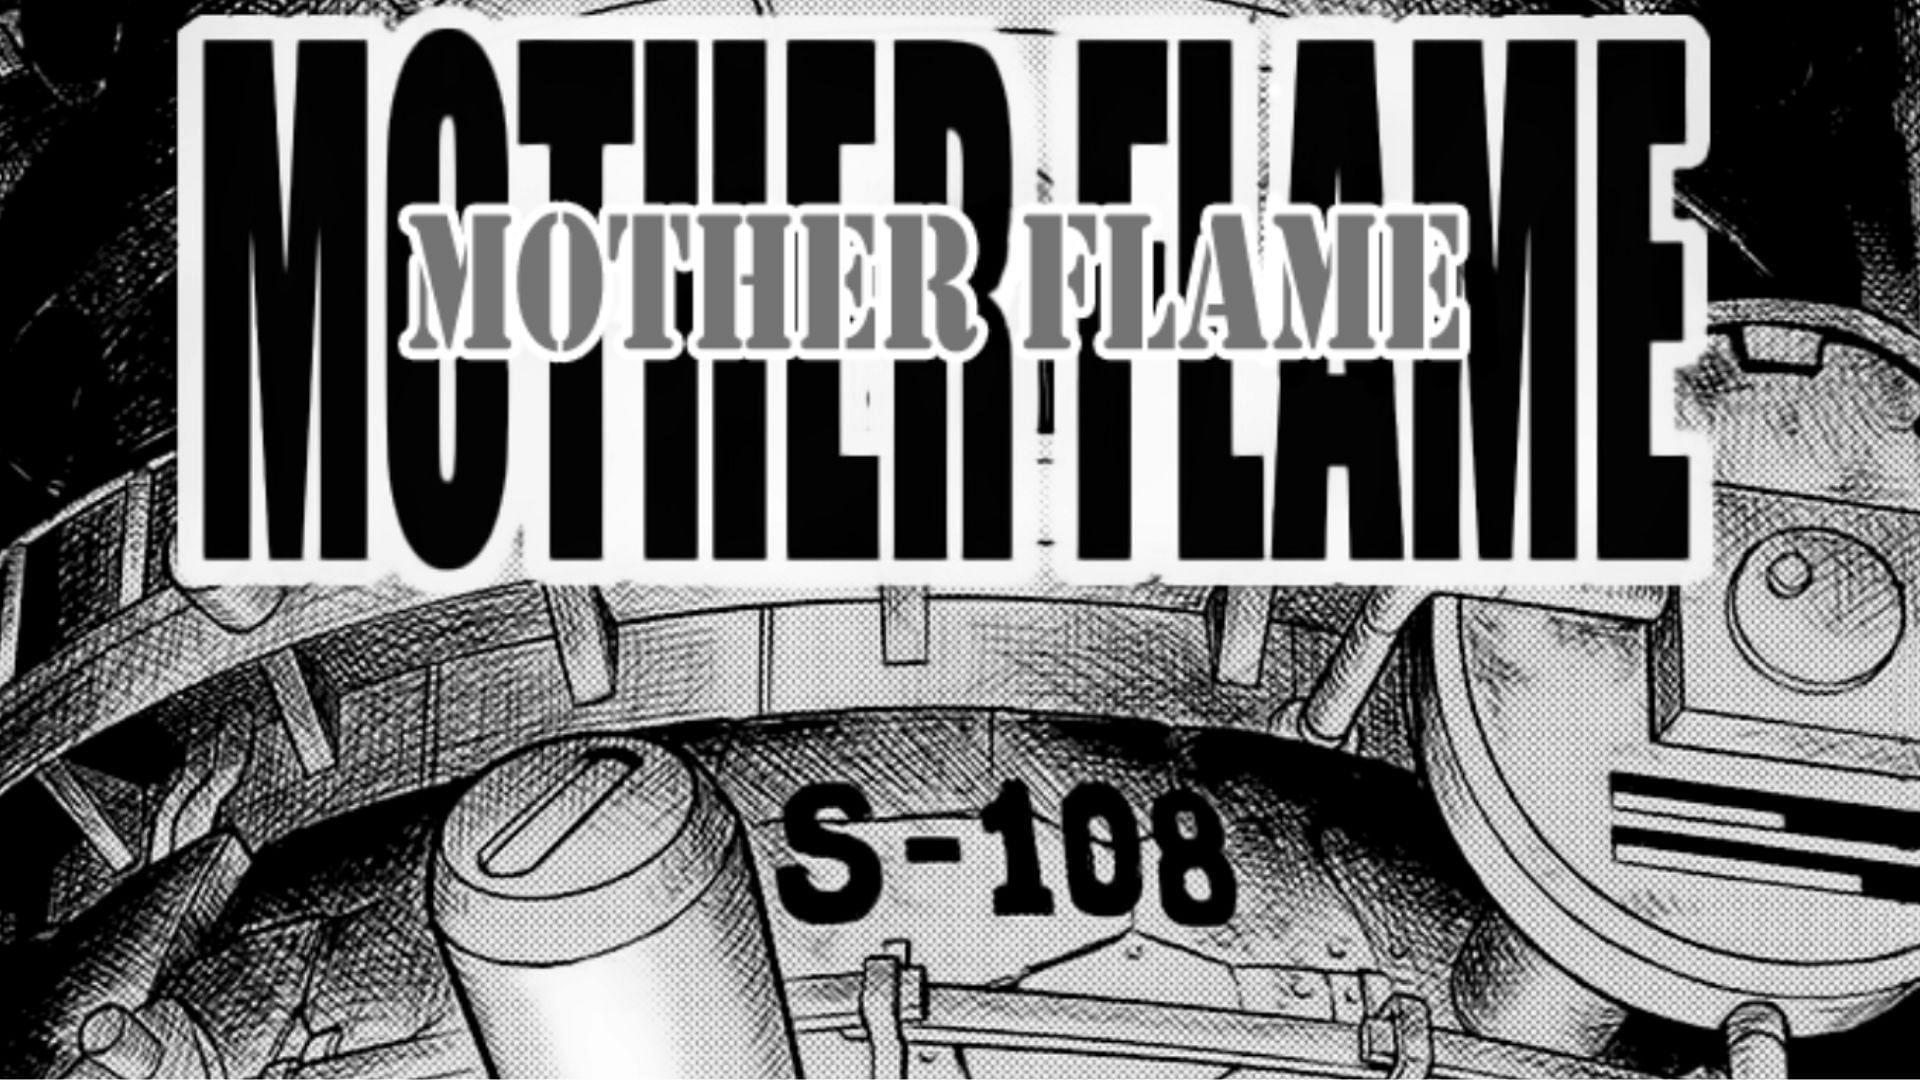 S-108 is written on the chamber in which the Mother Flame is stored (Image via Shueisha)